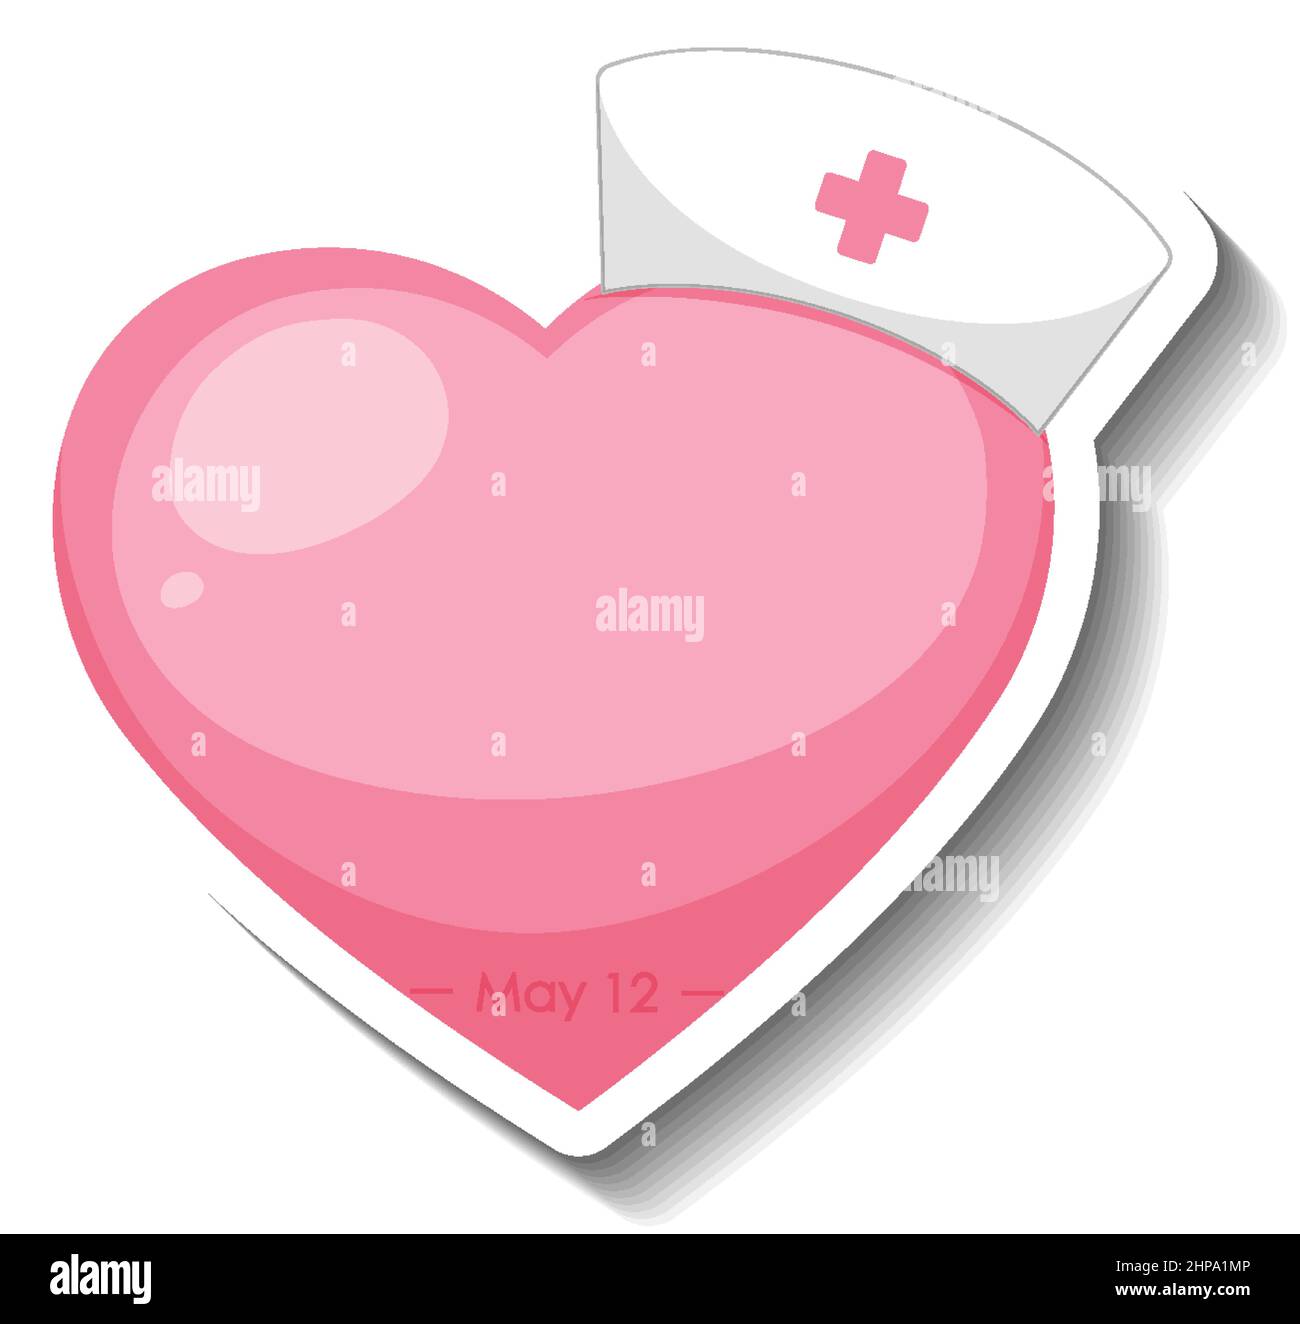 https://c8.alamy.com/comp/2HPA1MP/pink-gradient-heart-with-nursing-cap-illustration-2HPA1MP.jpg